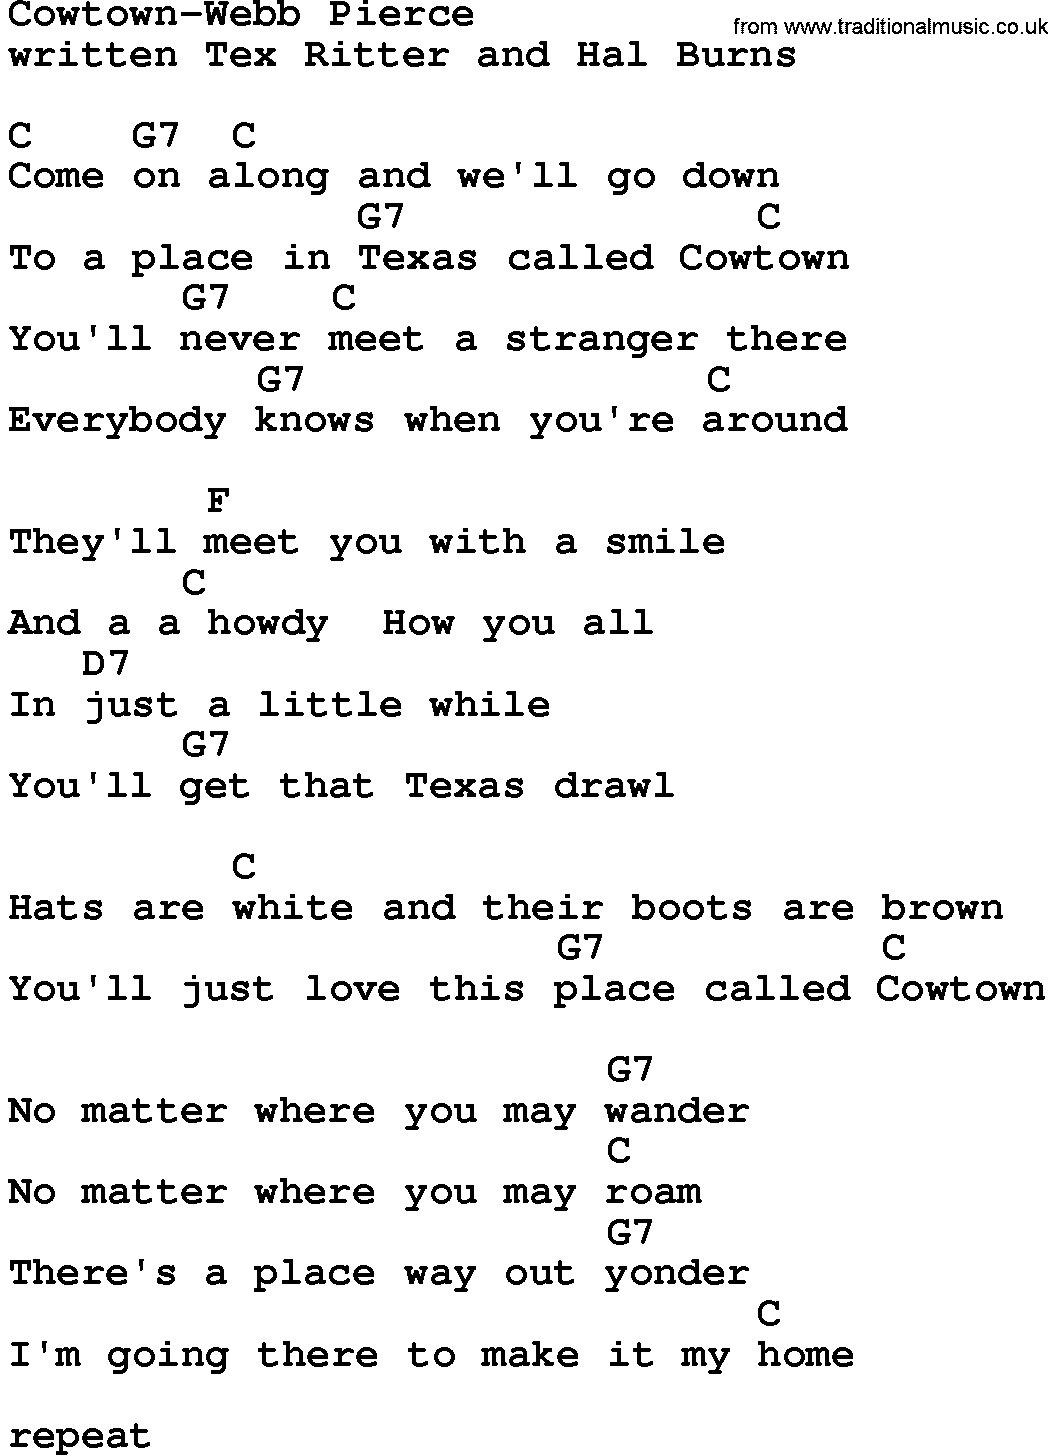 Country music song: Cowtown-Webb Pierce lyrics and chords